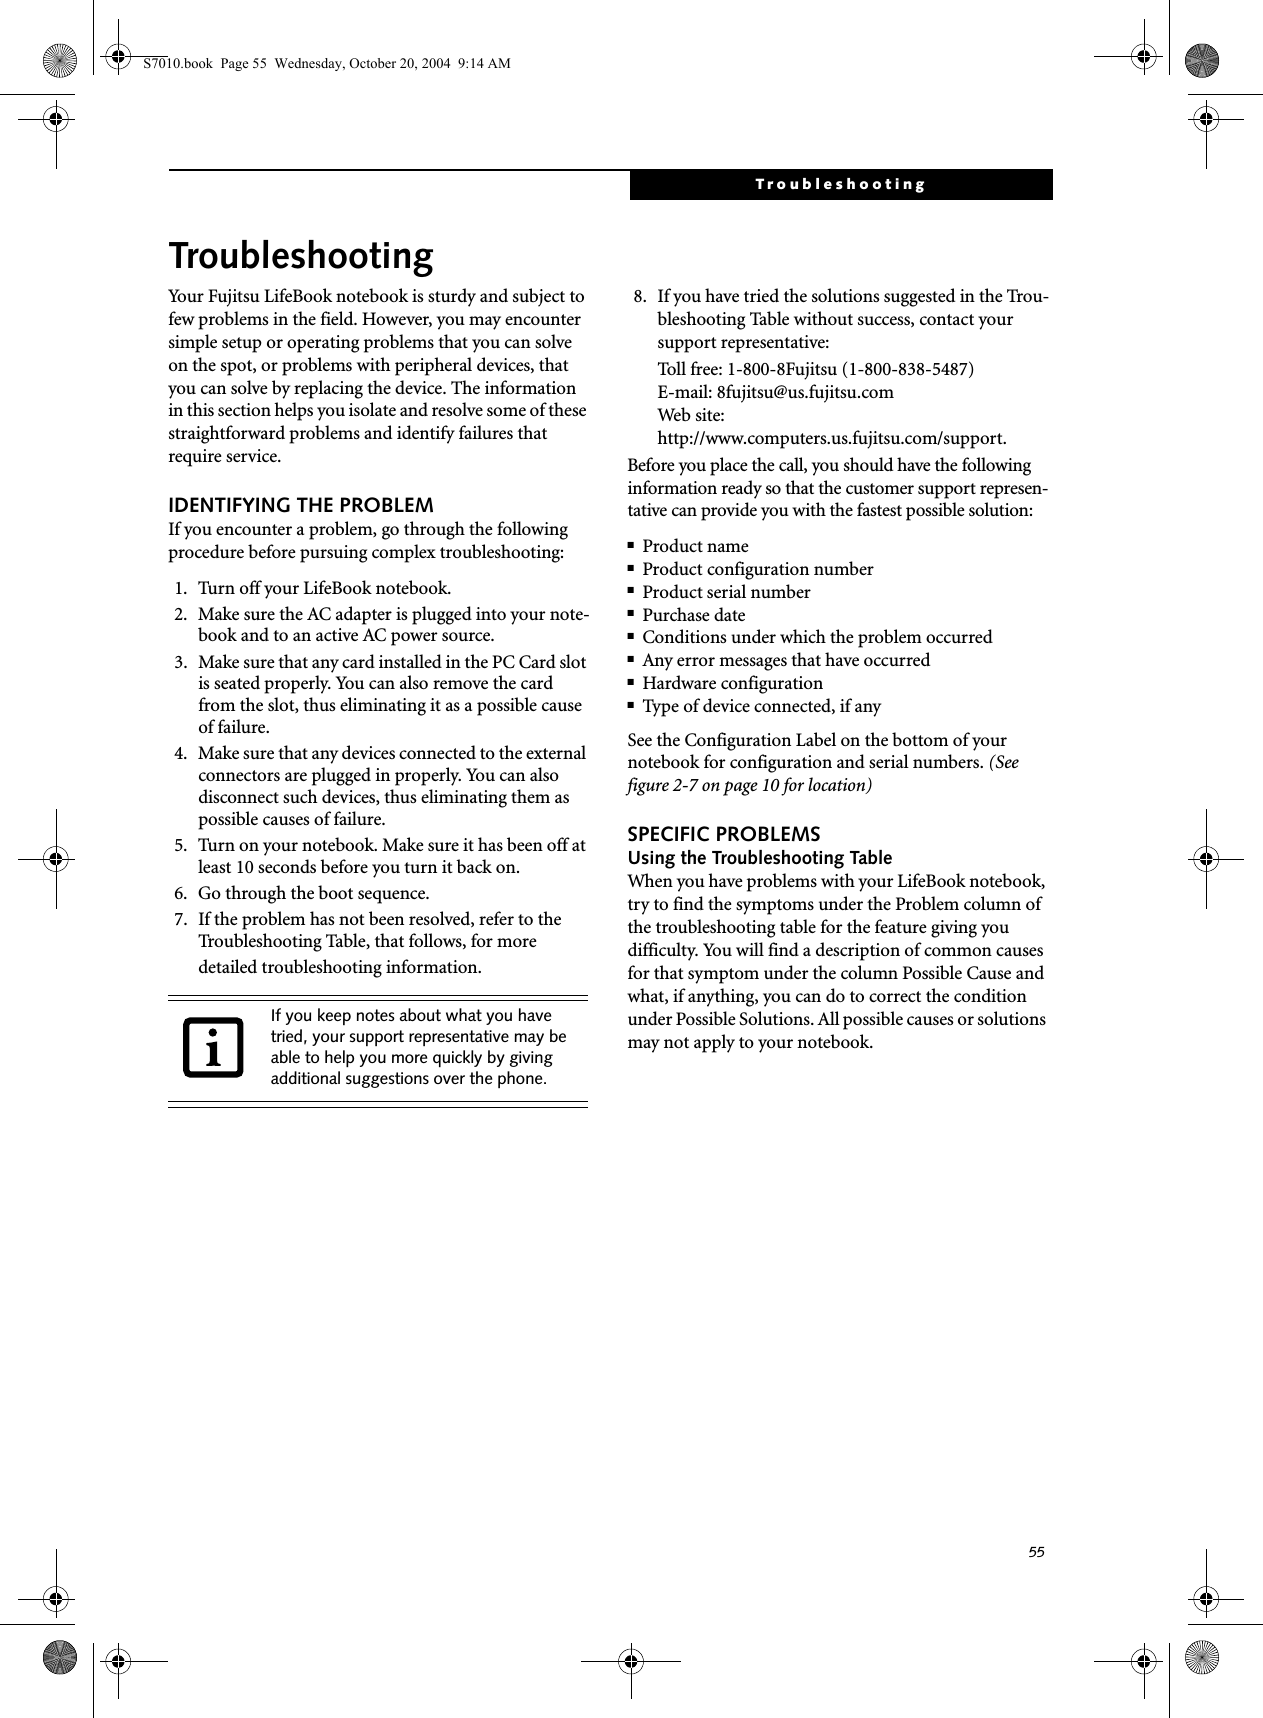 55TroubleshootingTroubleshootingYour Fujitsu LifeBook notebook is sturdy and subject to few problems in the field. However, you may encounter simple setup or operating problems that you can solve on the spot, or problems with peripheral devices, that you can solve by replacing the device. The information in this section helps you isolate and resolve some of these straightforward problems and identify failures that require service.IDENTIFYING THE PROBLEMIf you encounter a problem, go through the following procedure before pursuing complex troubleshooting:1. Turn off your LifeBook notebook.2. Make sure the AC adapter is plugged into your note-book and to an active AC power source.3. Make sure that any card installed in the PC Card slot is seated properly. You can also remove the card from the slot, thus eliminating it as a possible cause of failure.4. Make sure that any devices connected to the external connectors are plugged in properly. You can also disconnect such devices, thus eliminating them as possible causes of failure.5. Turn on your notebook. Make sure it has been off at least 10 seconds before you turn it back on.6. Go through the boot sequence.7. If the problem has not been resolved, refer to the Troubleshooting Table, that follows, for more detailed troubleshooting information. 8. If you have tried the solutions suggested in the Trou-bleshooting Table without success, contact your support representative: Toll free: 1-800-8Fujitsu (1-800-838-5487) E-mail: 8fujitsu@us.fujitsu.com Web site: http://www.computers.us.fujitsu.com/support.Before you place the call, you should have the following information ready so that the customer support represen-tative can provide you with the fastest possible solution:■Product name■Product configuration number■Product serial number■Purchase date■Conditions under which the problem occurred■Any error messages that have occurred■Hardware configuration■Type of device connected, if anySee the Configuration Label on the bottom of yournotebook for configuration and serial numbers. (See figure 2-7 on page 10 for location)SPECIFIC PROBLEMSUsing the Troubleshooting TableWhen you have problems with your LifeBook notebook, try to find the symptoms under the Problem column of the troubleshooting table for the feature giving you difficulty. You will find a description of common causes for that symptom under the column Possible Cause and what, if anything, you can do to correct the condition under Possible Solutions. All possible causes or solutions may not apply to your notebook.If you keep notes about what you have tried, your support representative may be able to help you more quickly by giving additional suggestions over the phone.S7010.book  Page 55  Wednesday, October 20, 2004  9:14 AM